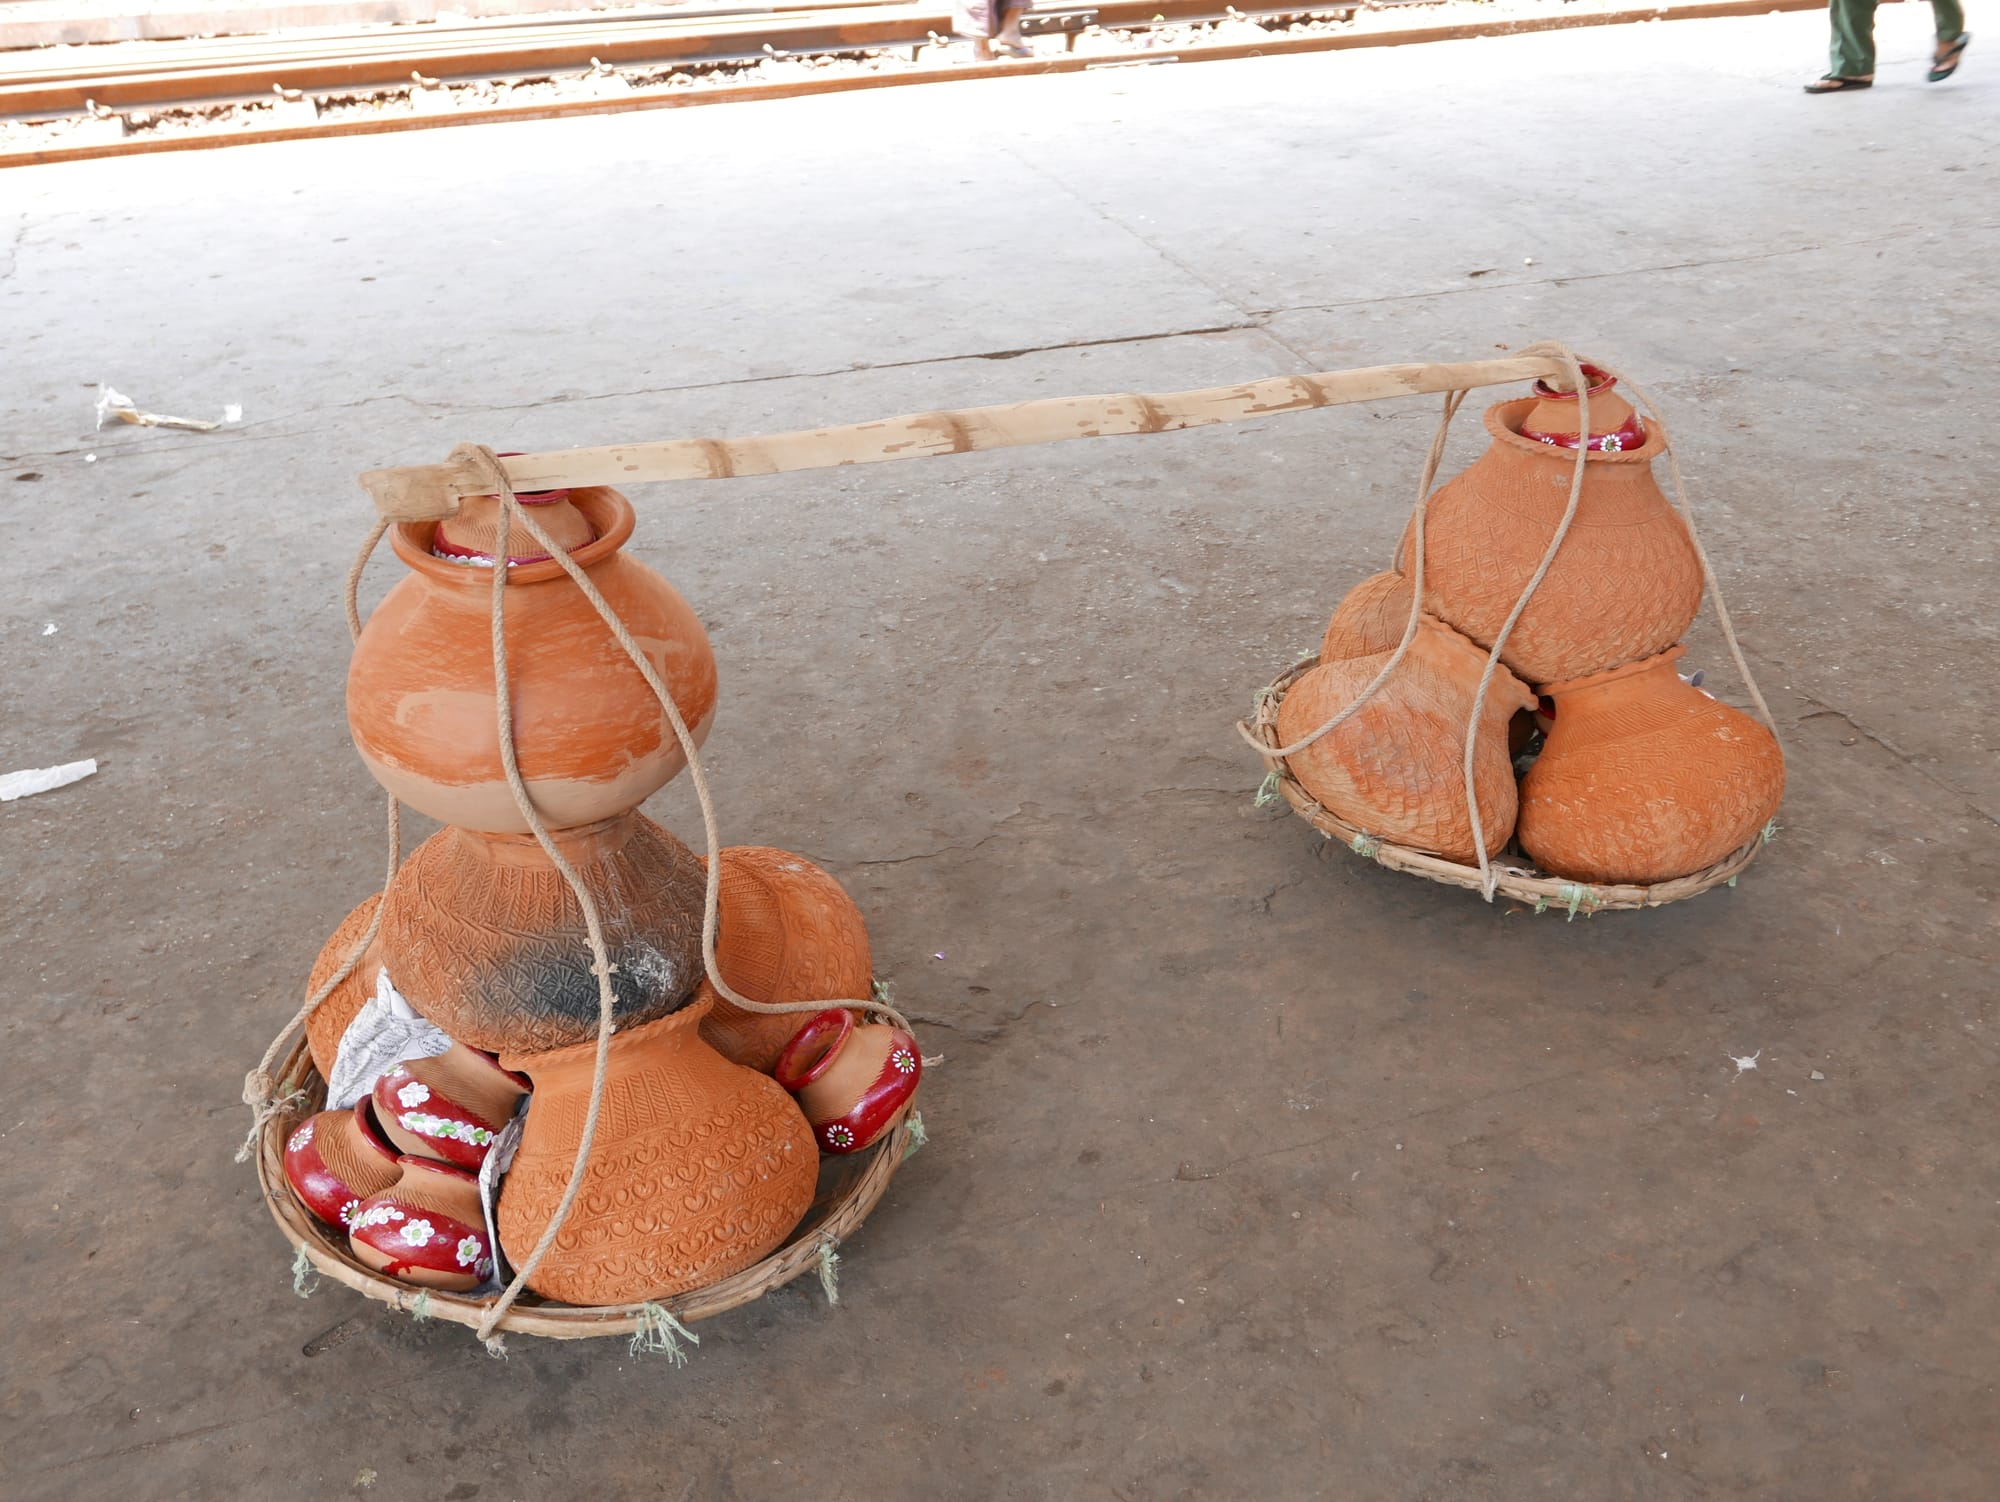 Photo by Author — pots stacked on the platform — Yangon Train Station